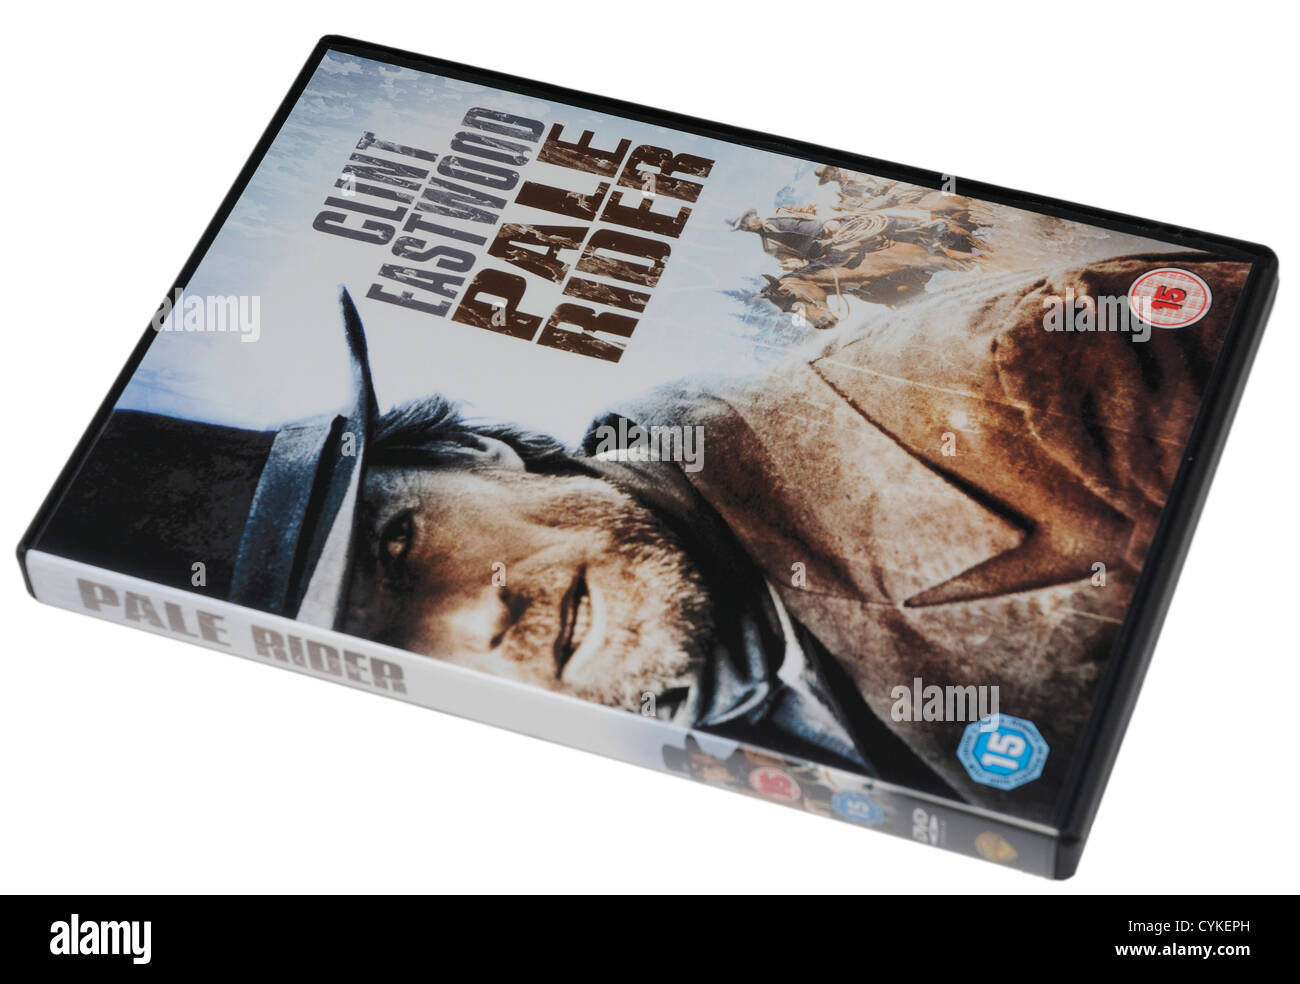 Pale Rider DVD con Clint Eastwood Foto Stock